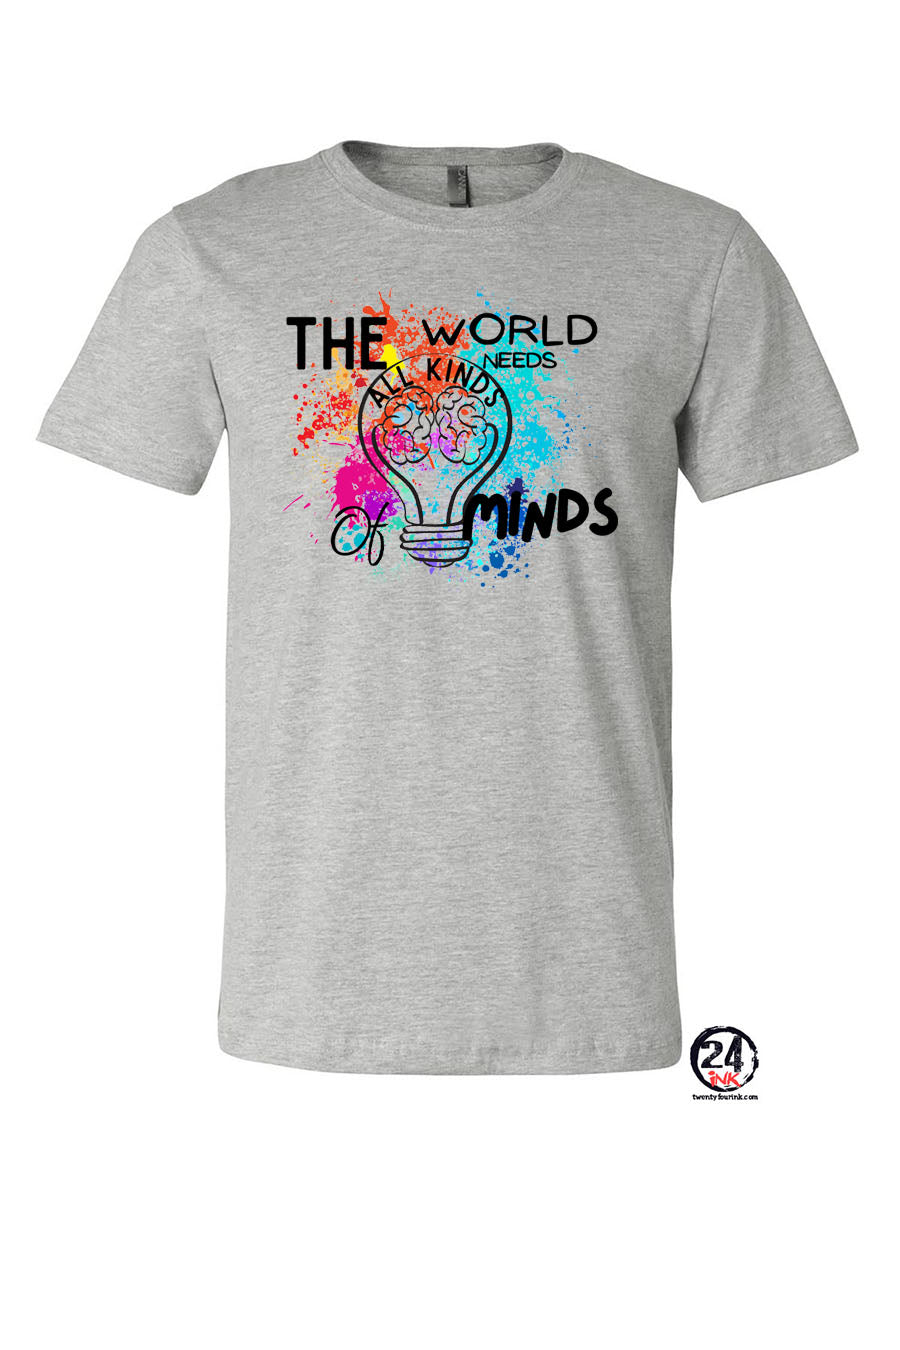 All Kinds Of Minds T-shirt